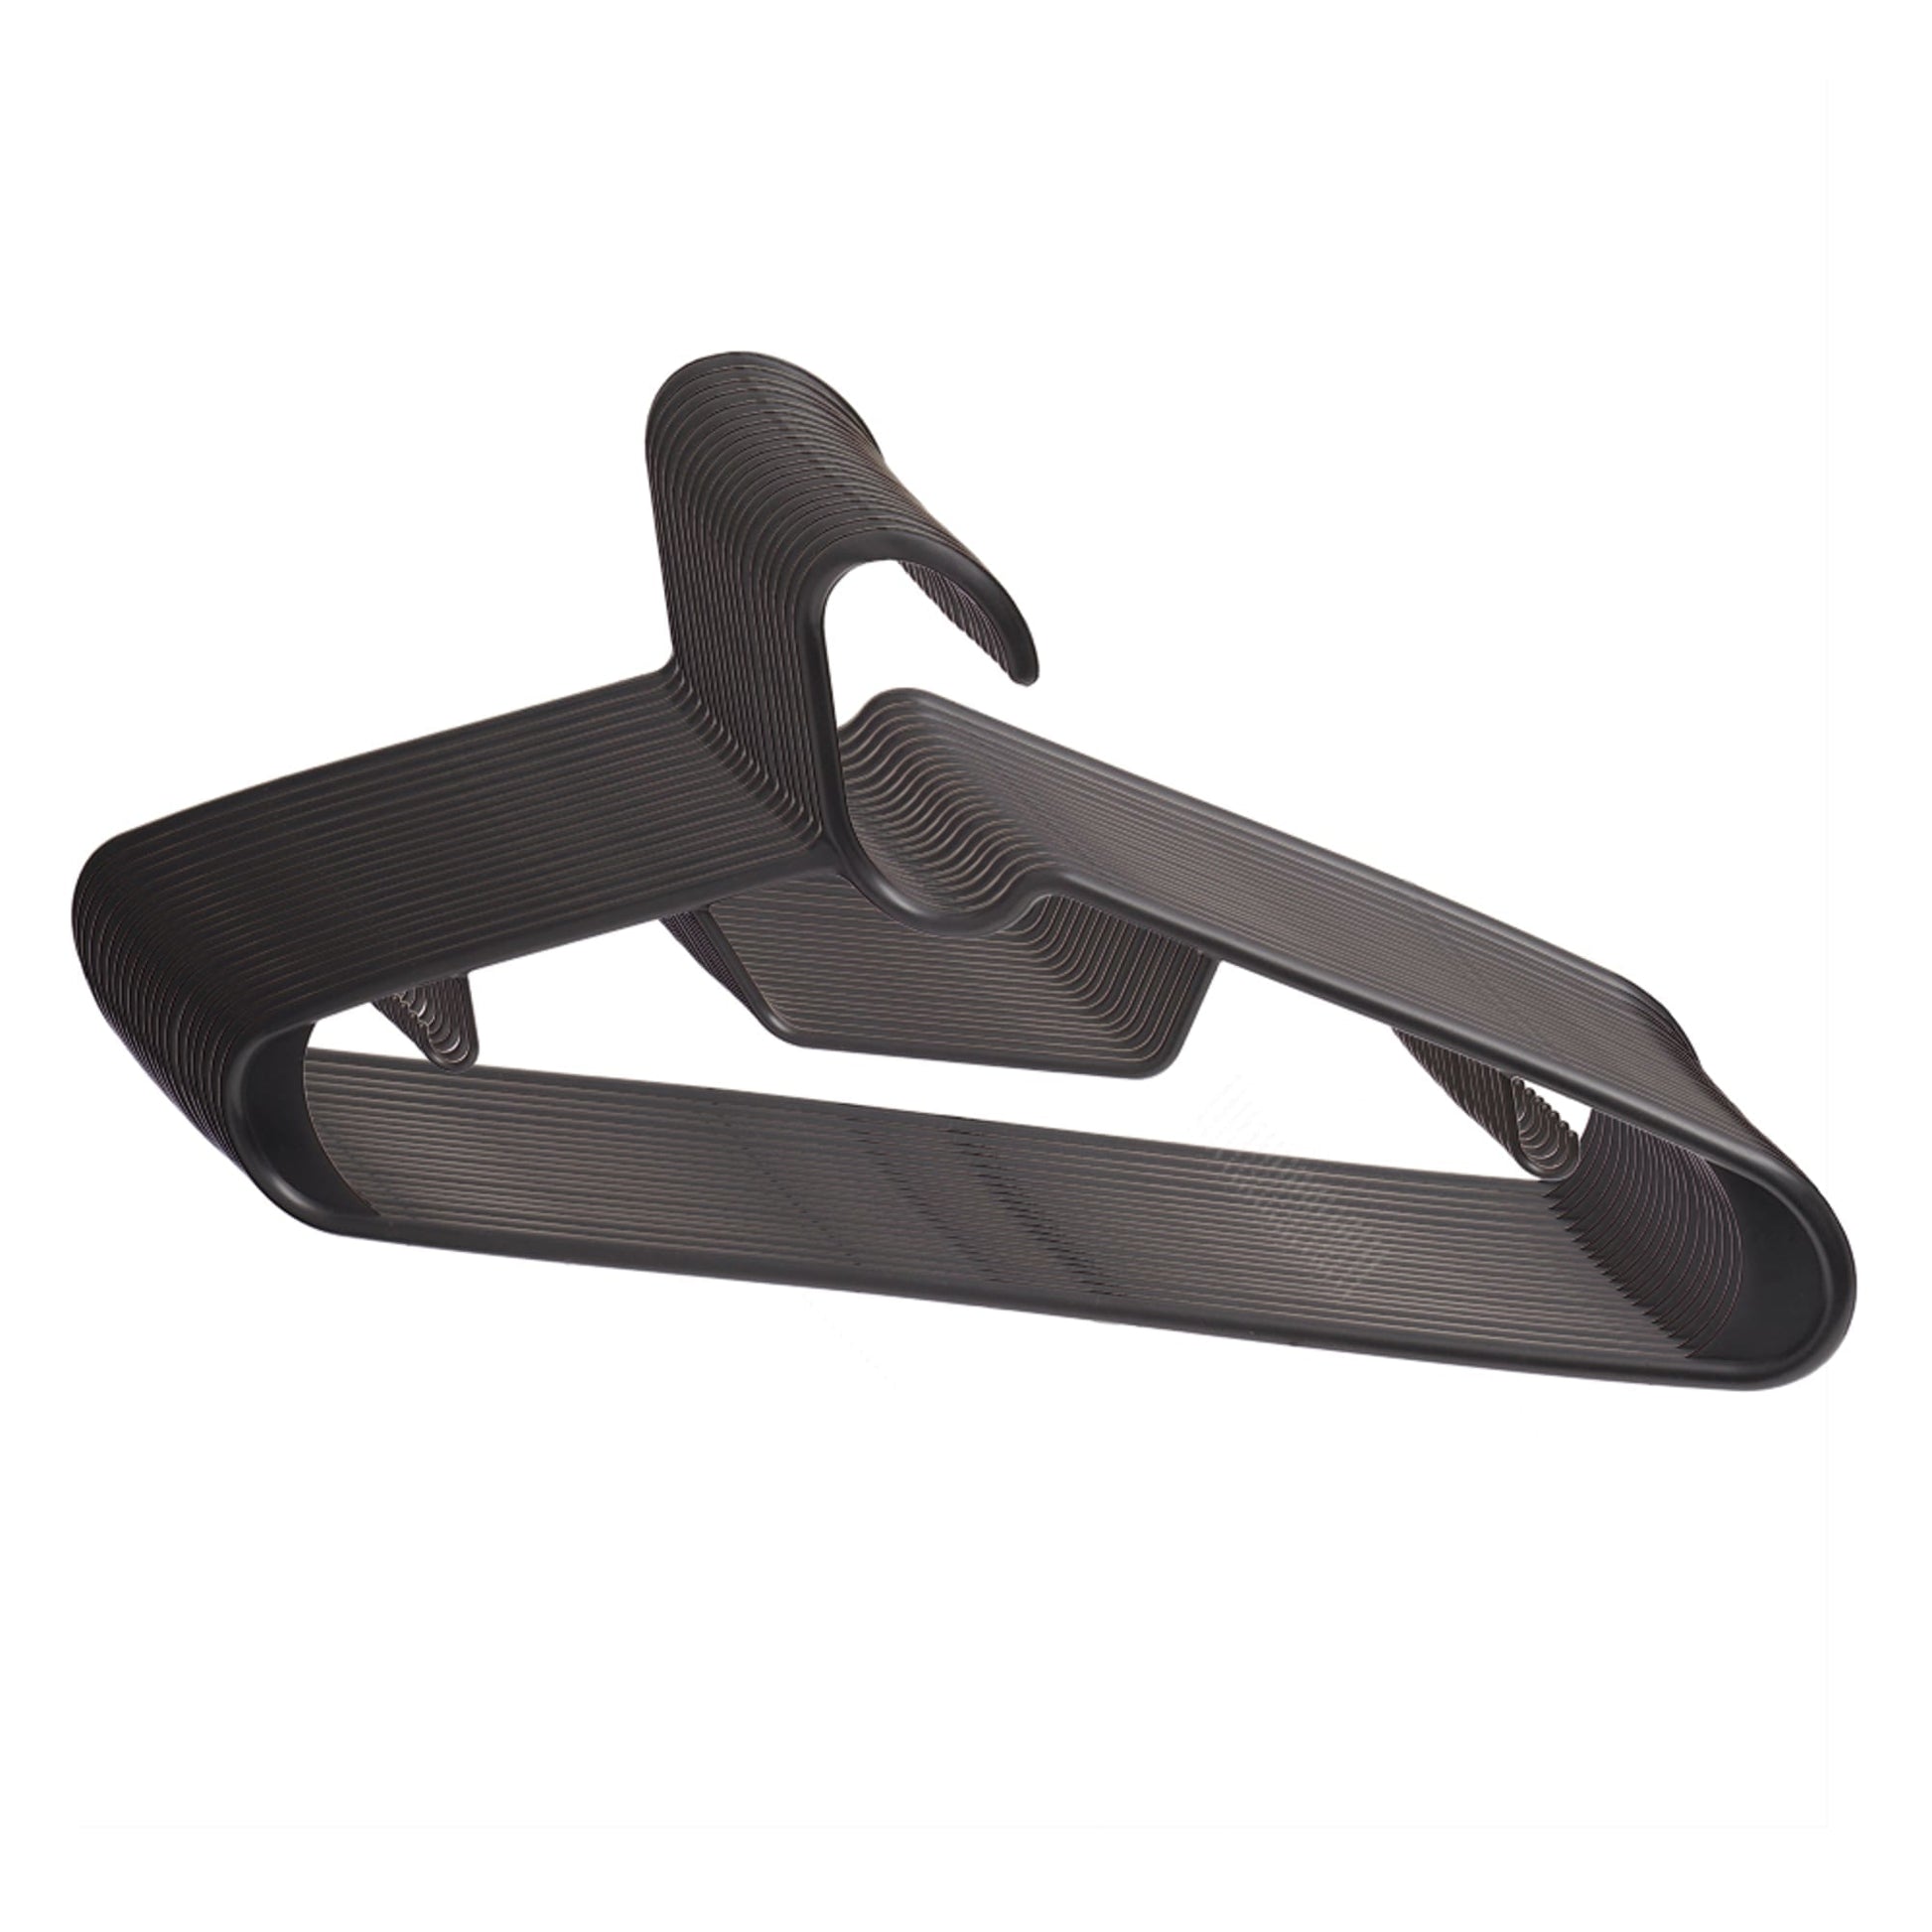 Black Plastic Top Hanger  Product & Reviews - Only Hangers – Only Hangers  Inc.